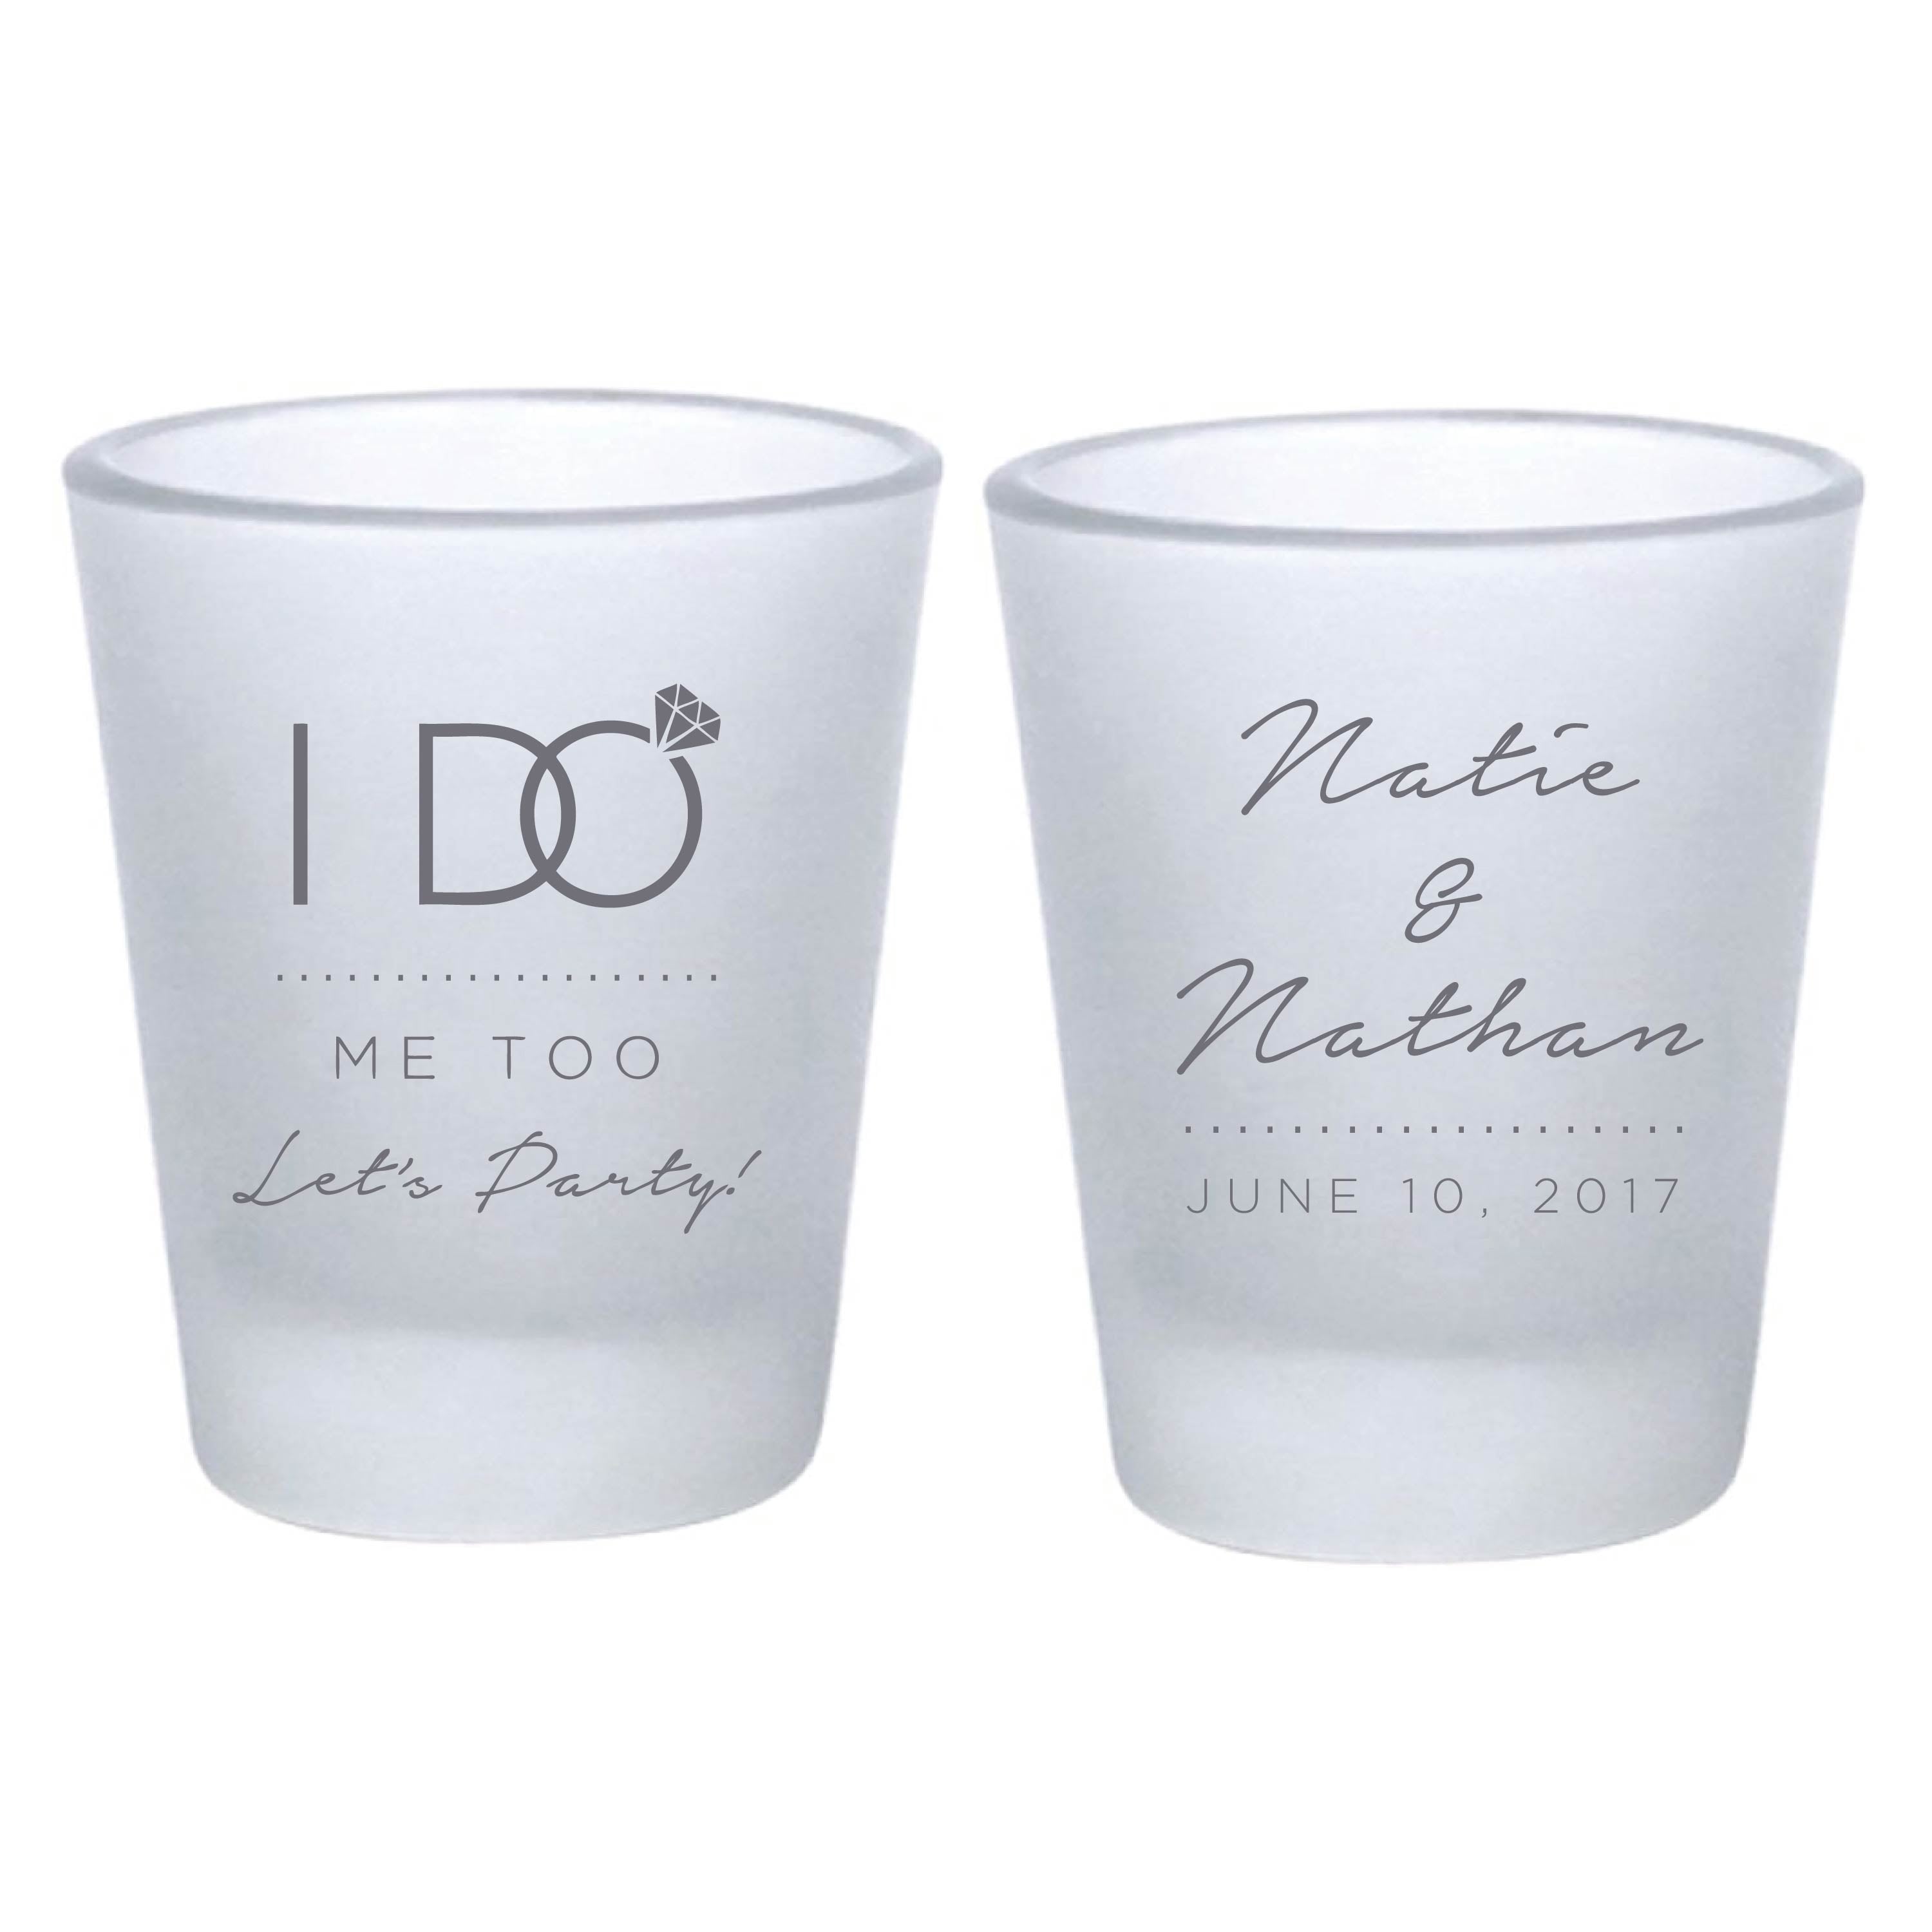 I DO Me Too Let's Party Wedding Frosted Shot Glasses (27)